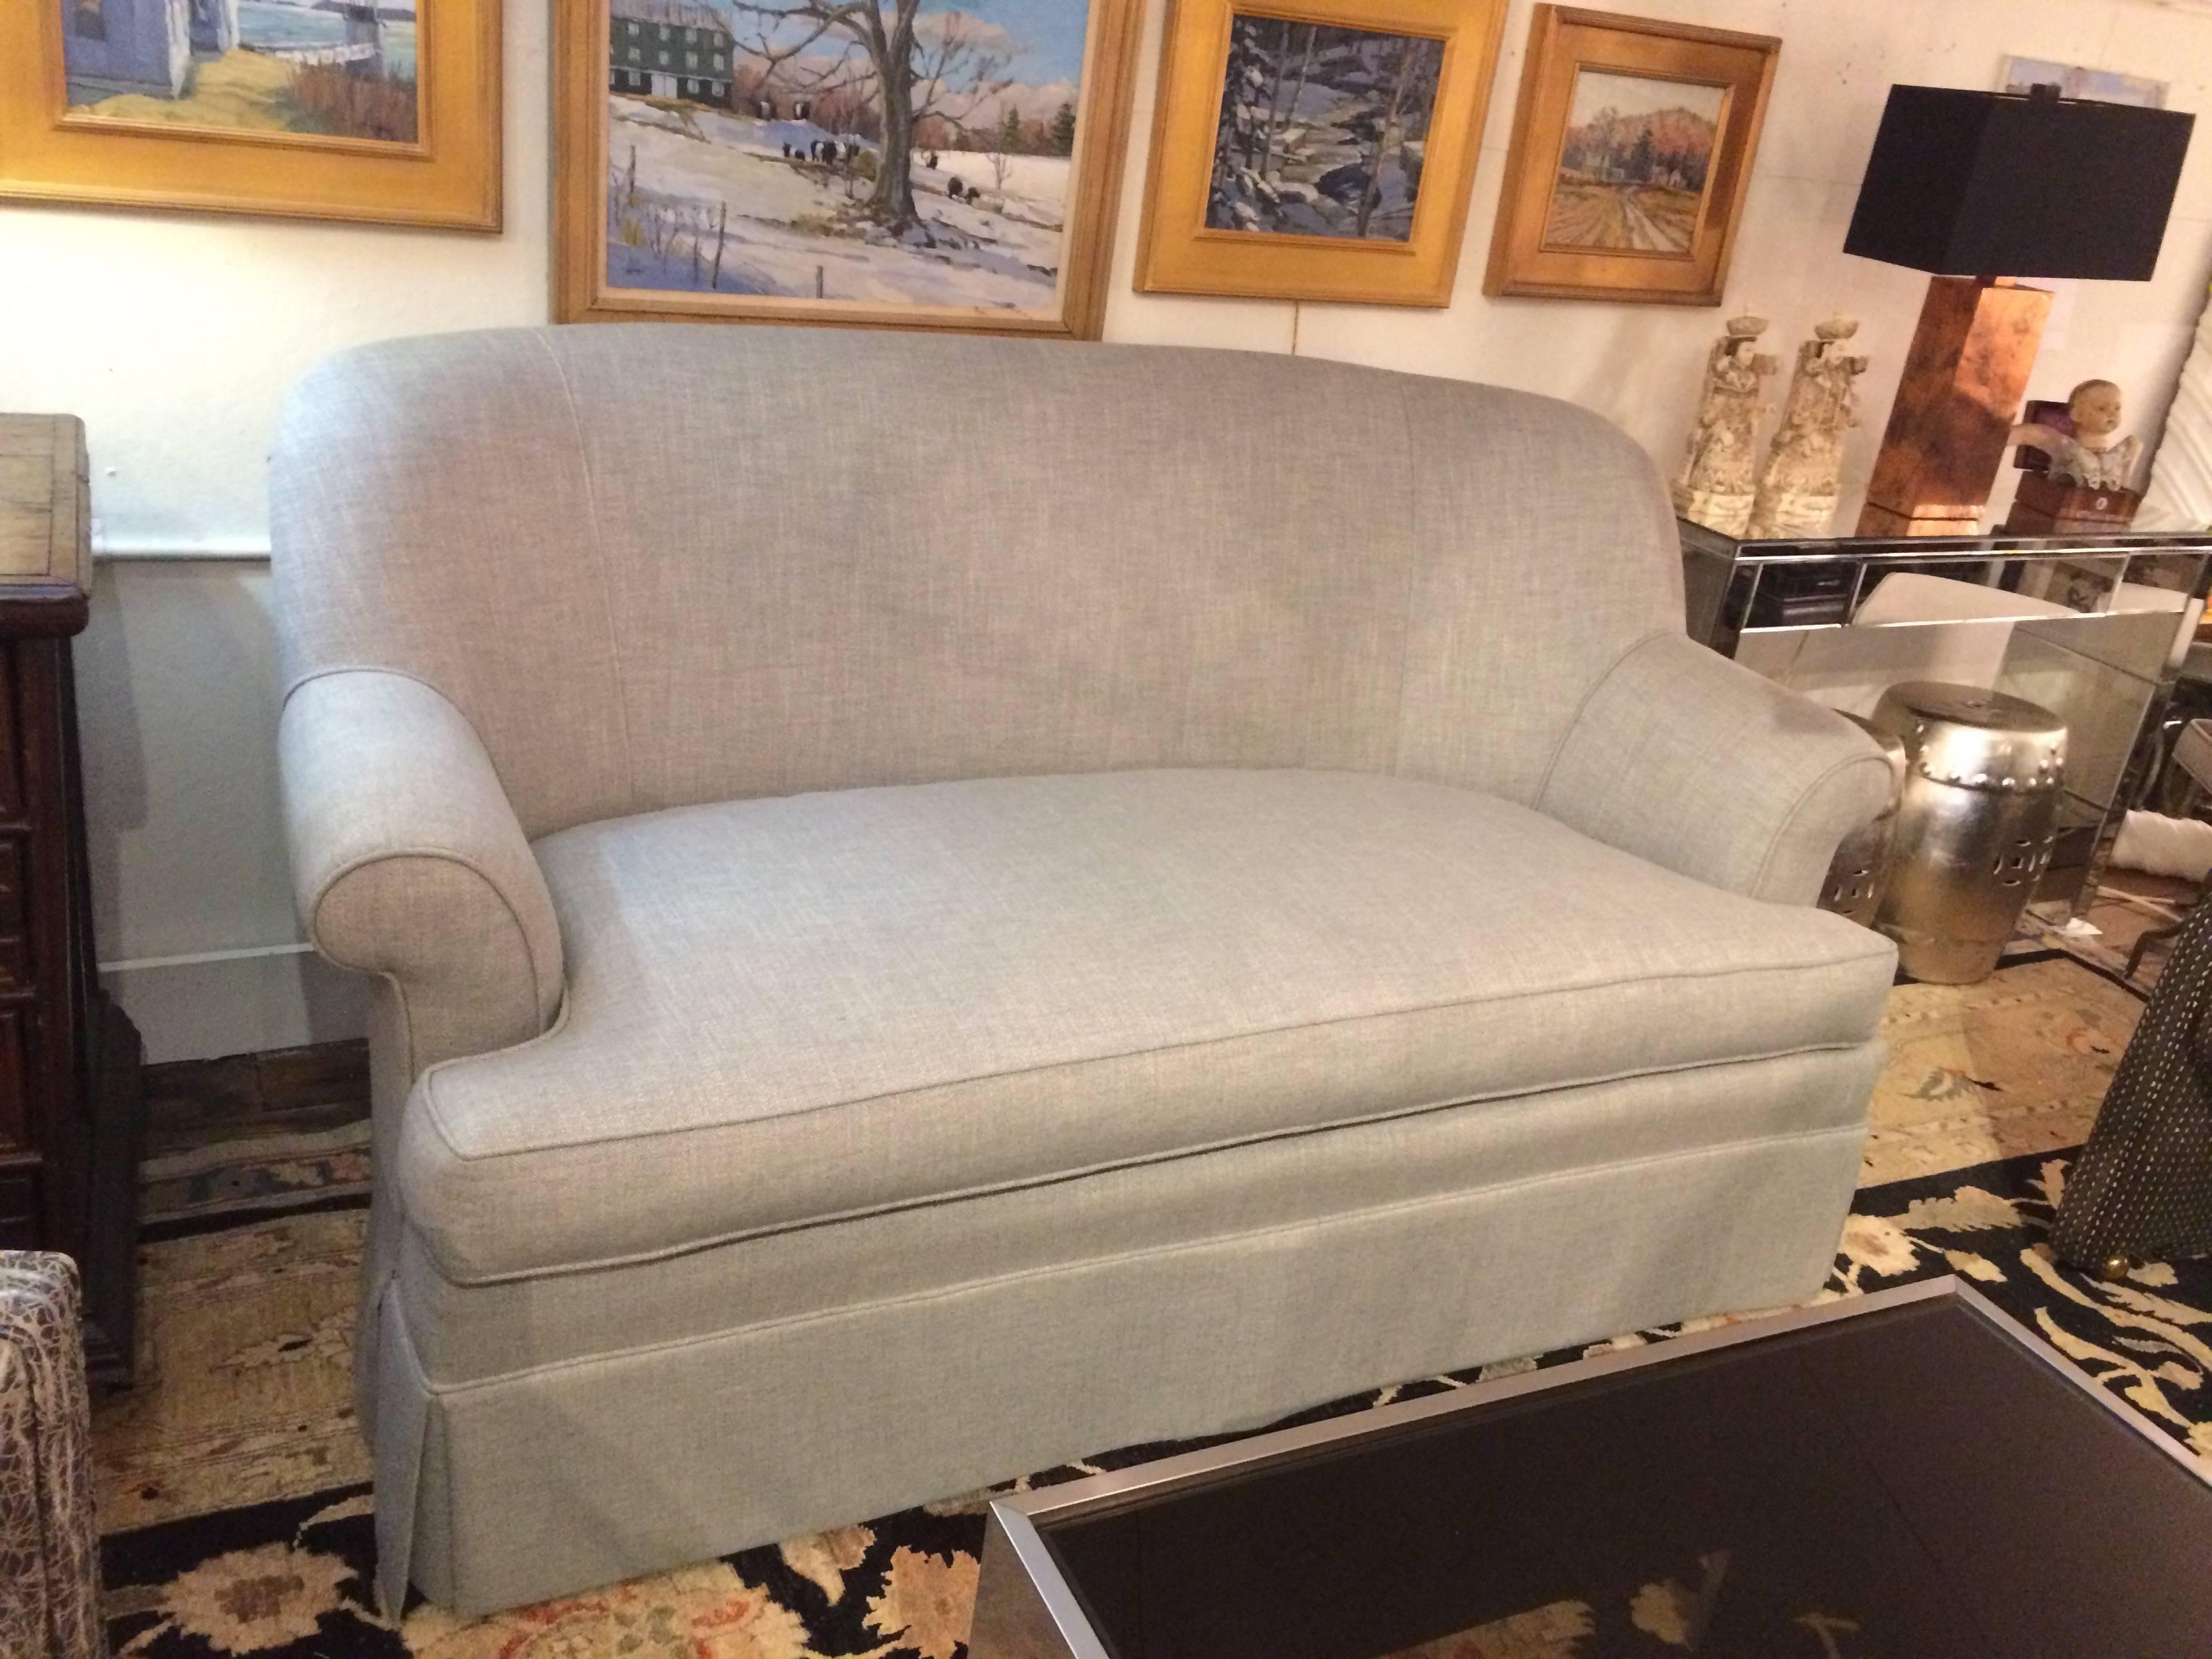 Two tailored platinum gray linen skirted loveseats sofas with fabulous grey and white contemporary pillows included. Seat depth w/o pillows is 28.
Arm height: 27

Will split the pair.